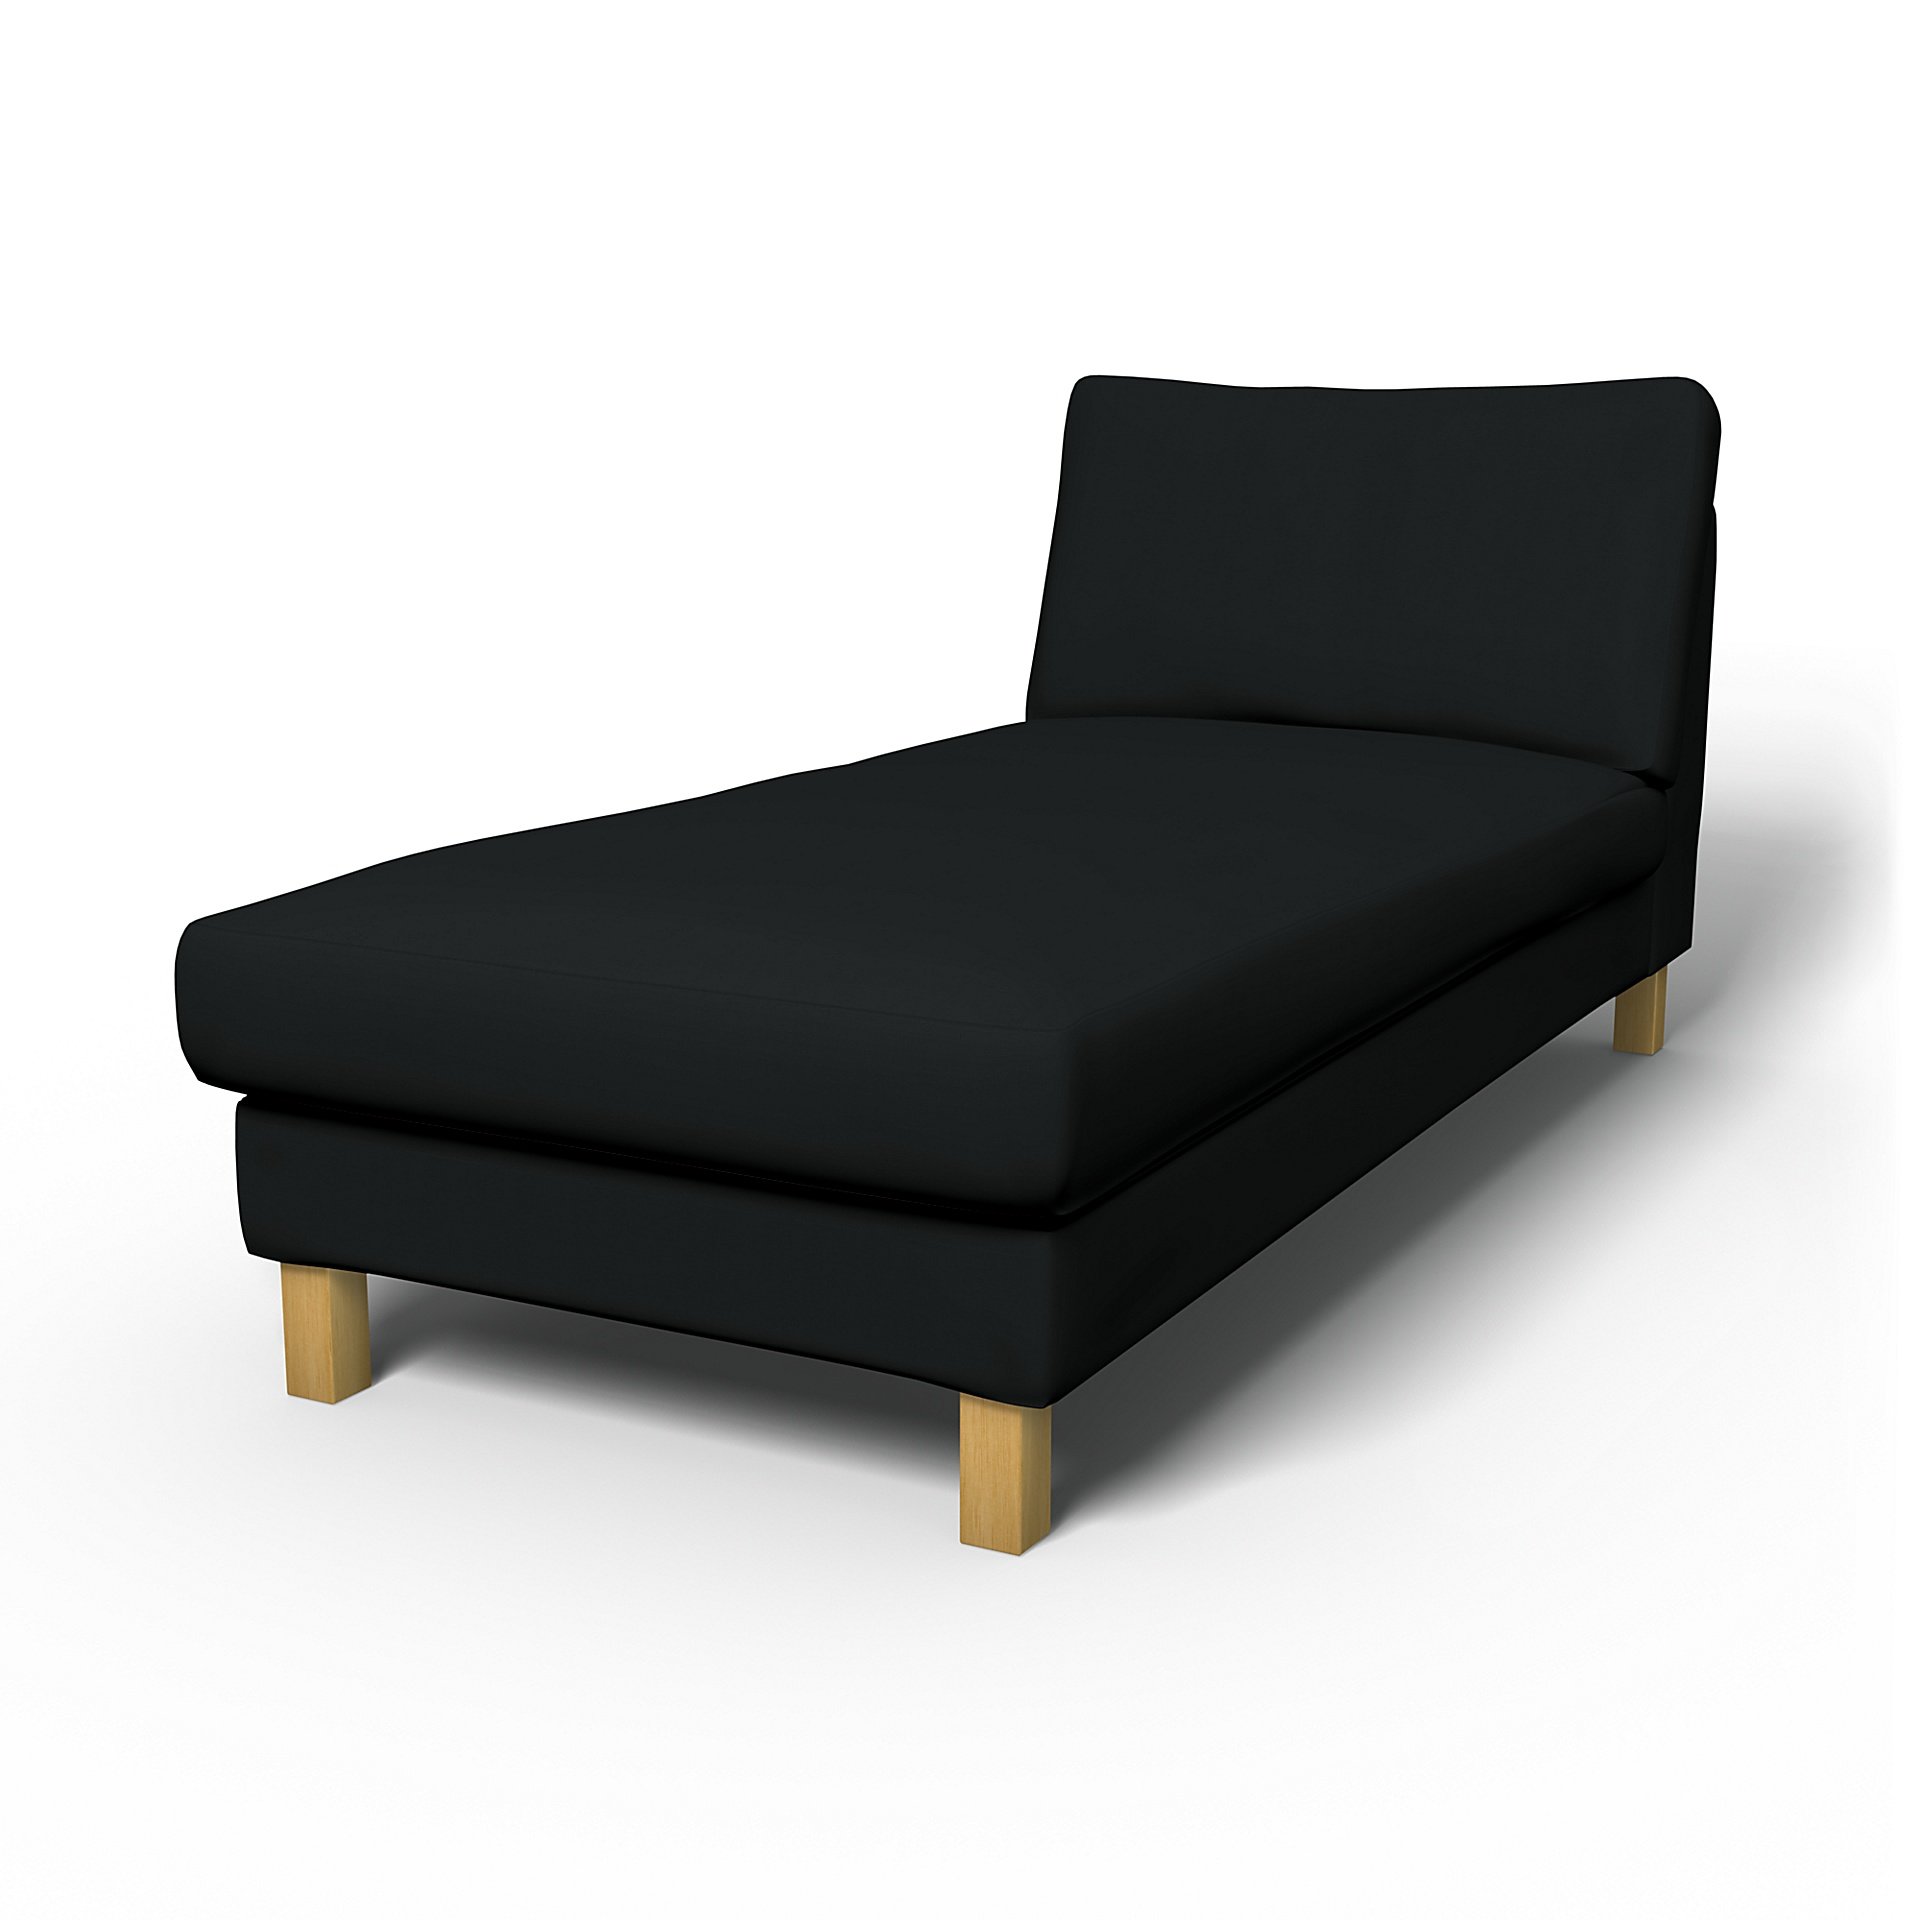 IKEA - Karlstad Stand Alone Chaise Longue Cover, Jet Black, Cotton - Bemz